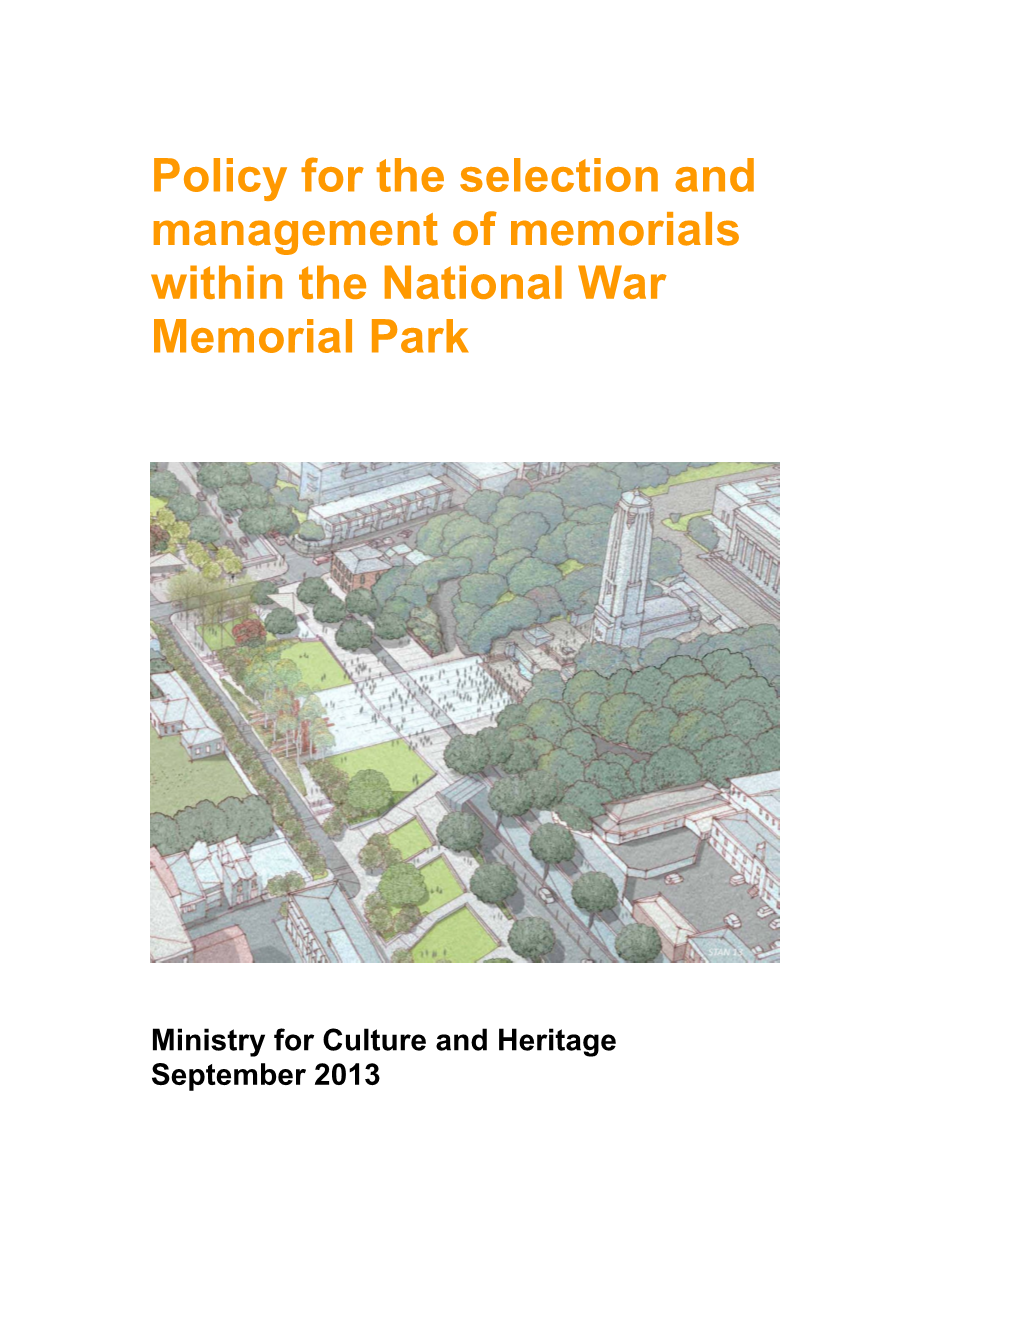 Policy for the Management of Memorials Within the National War Memorial Park